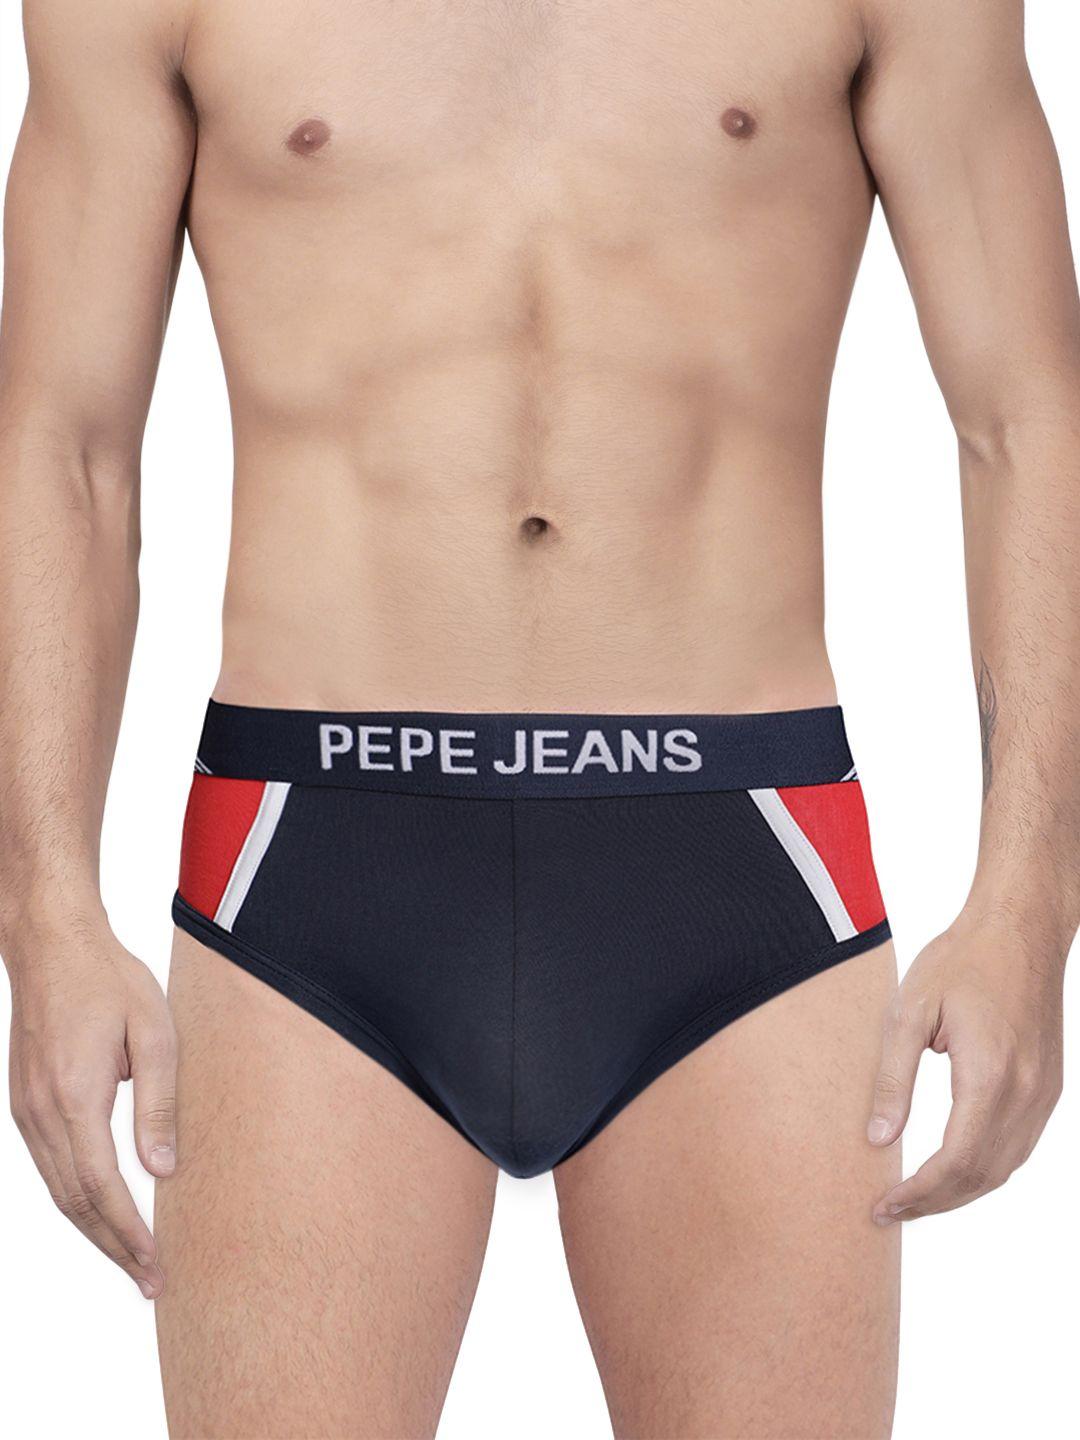 pepe jeans men navy & red colourblocked briefs 8904311303671